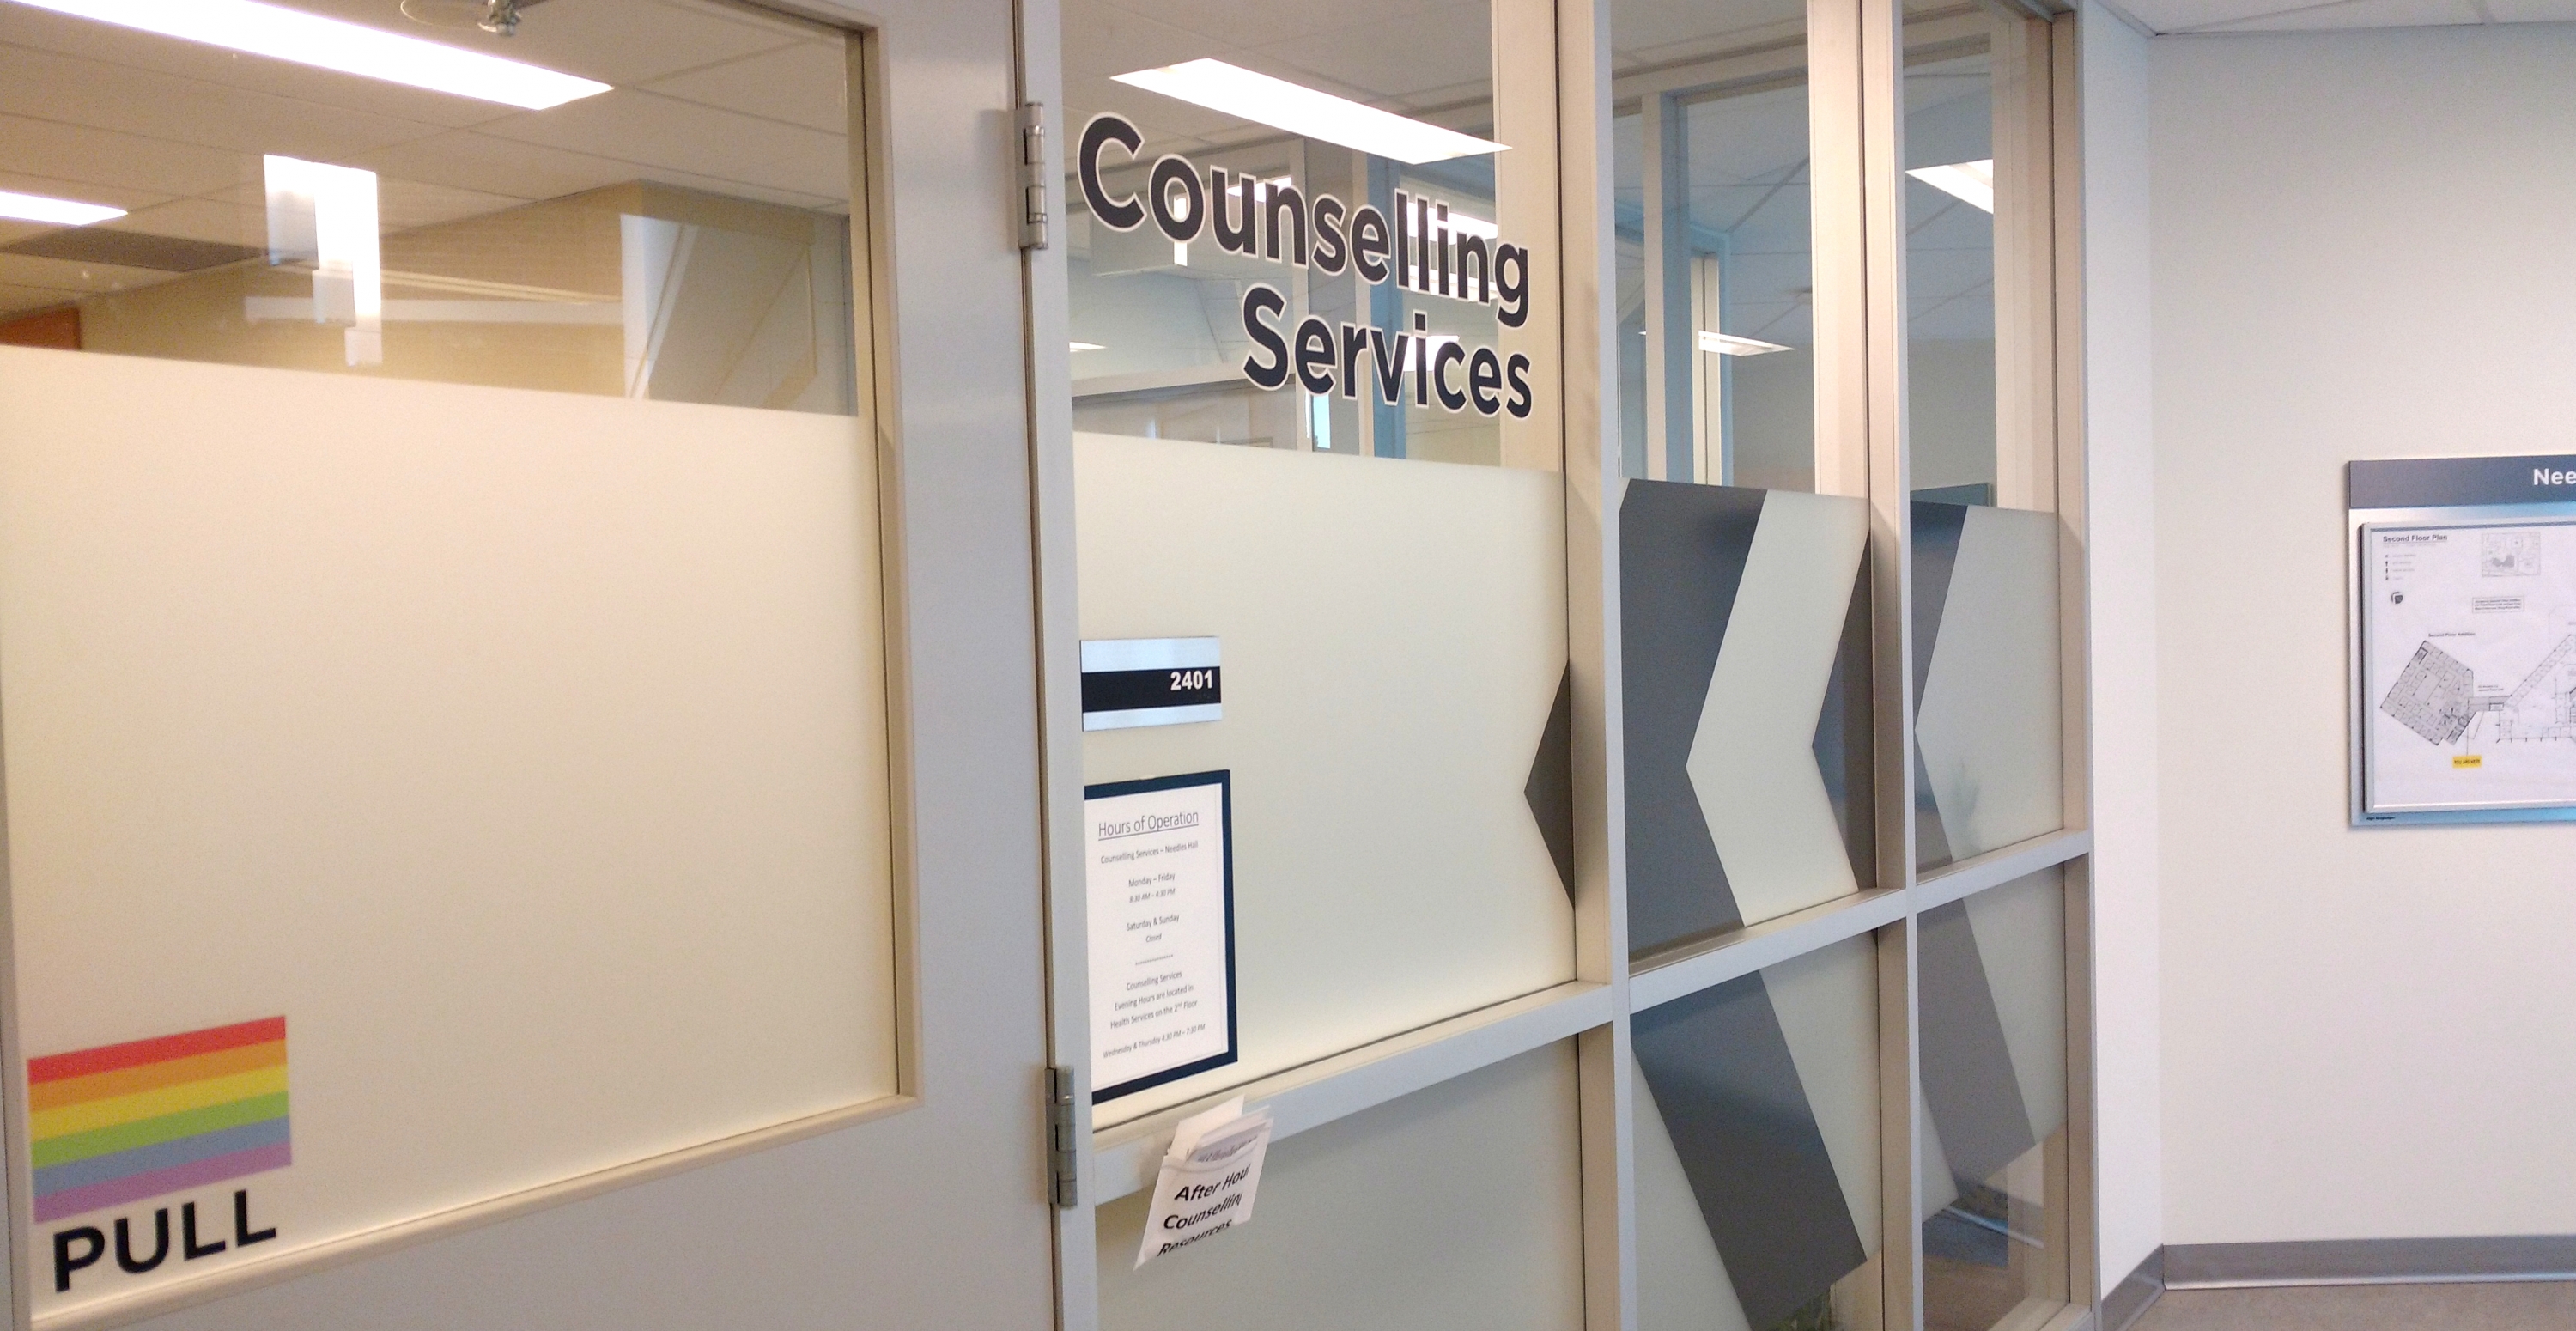 Counselling Services Entrance